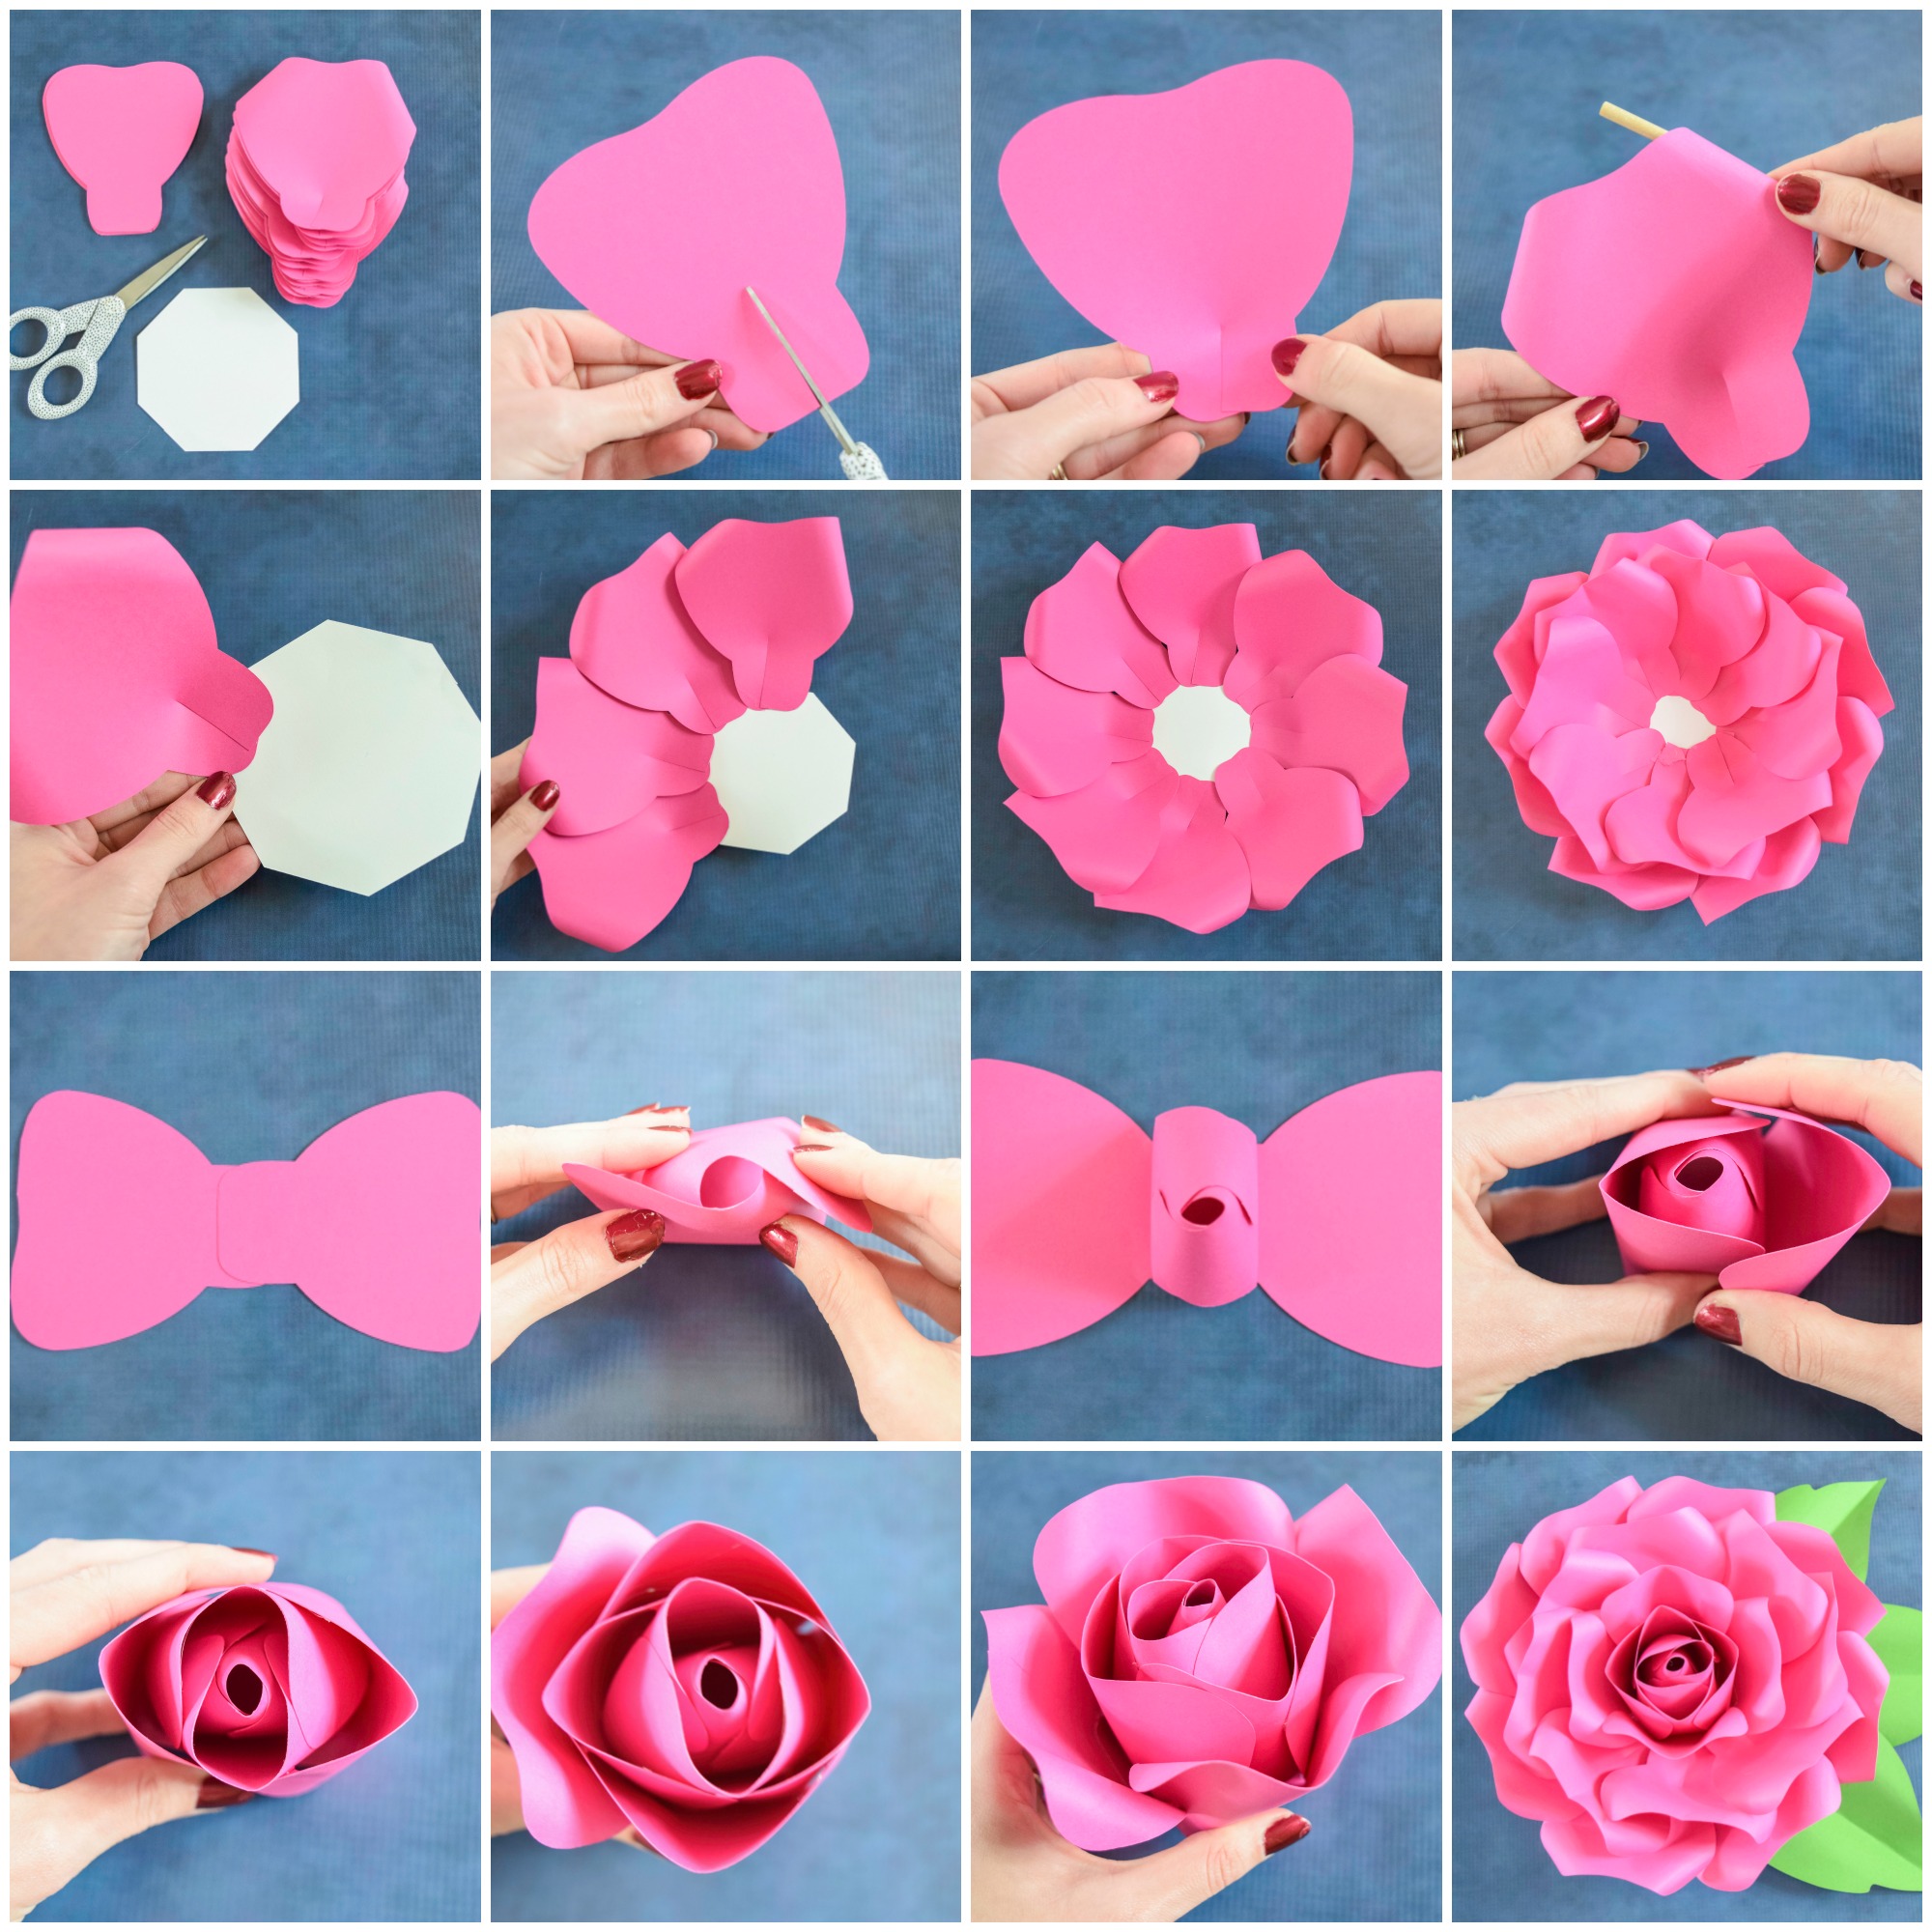 Giant Paper Flowers-How to Make Paper Garden Roses with Step by Step  Tutorial